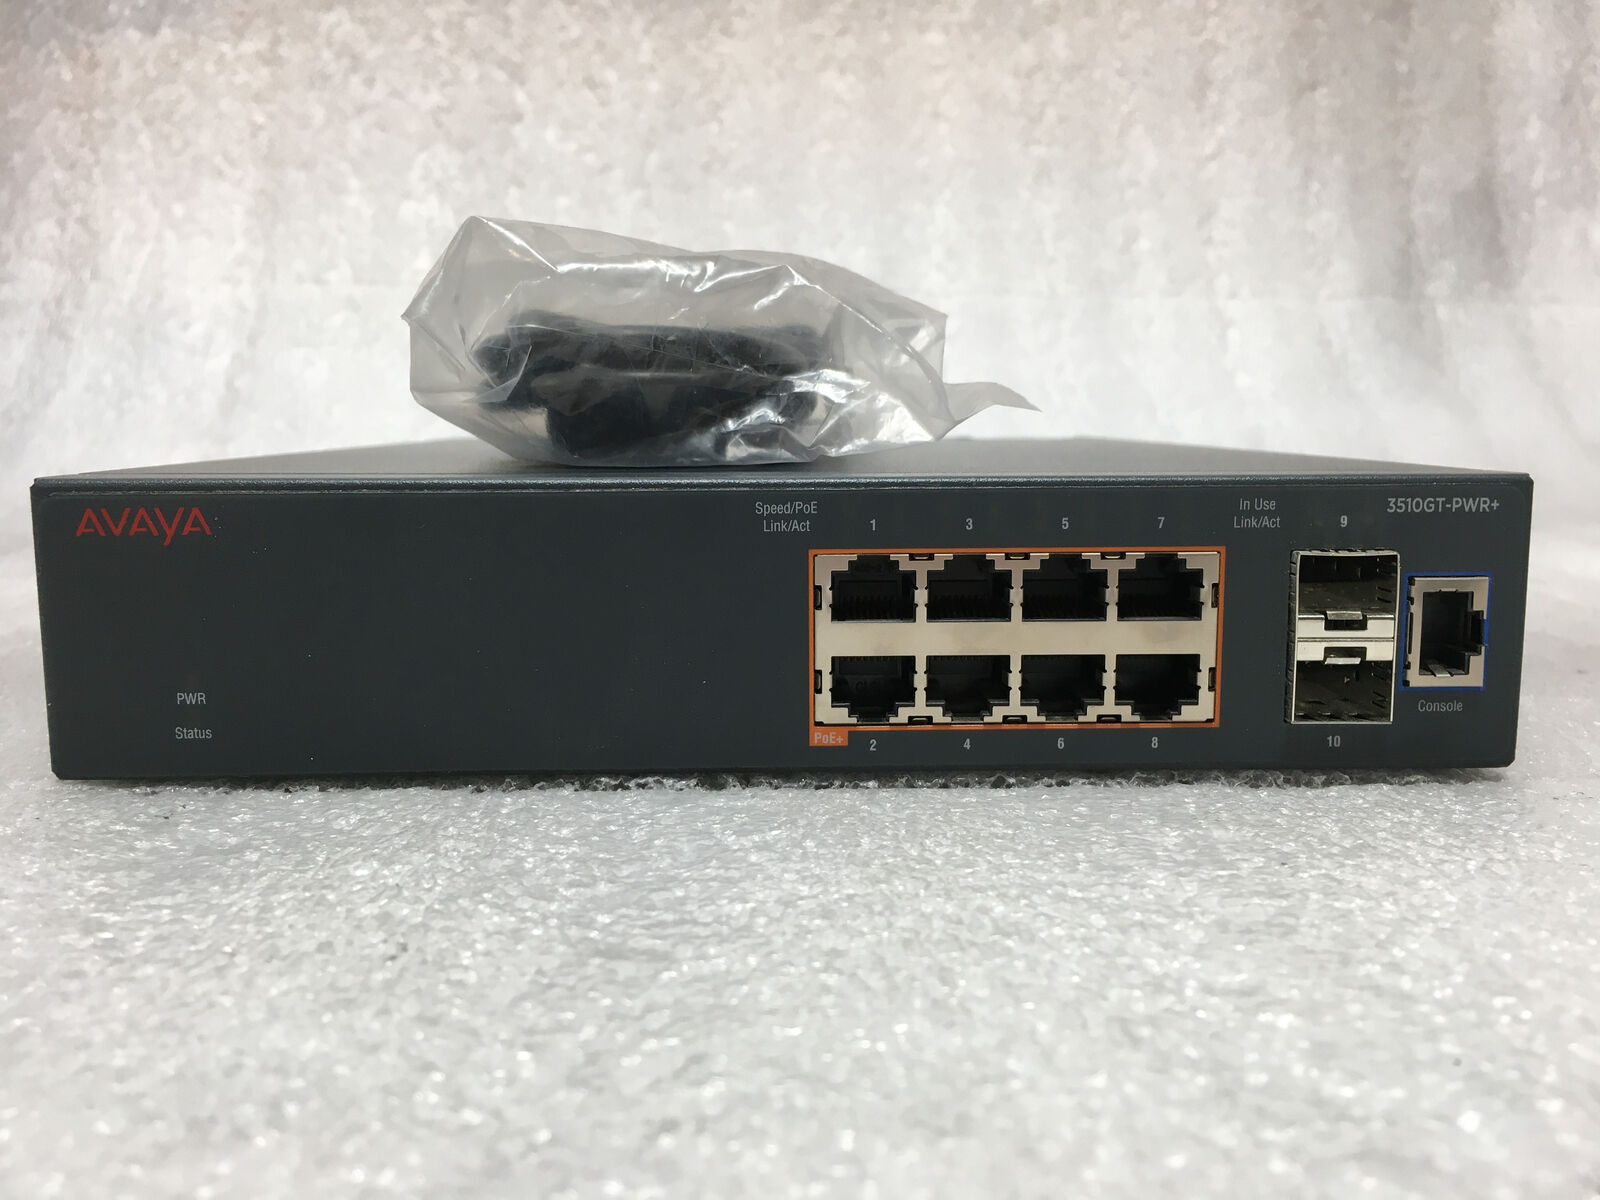 AVAYA 3510GT-PWR+ 8 PORT ETHERNET ROUTING SWITCH POWER CORD Tested